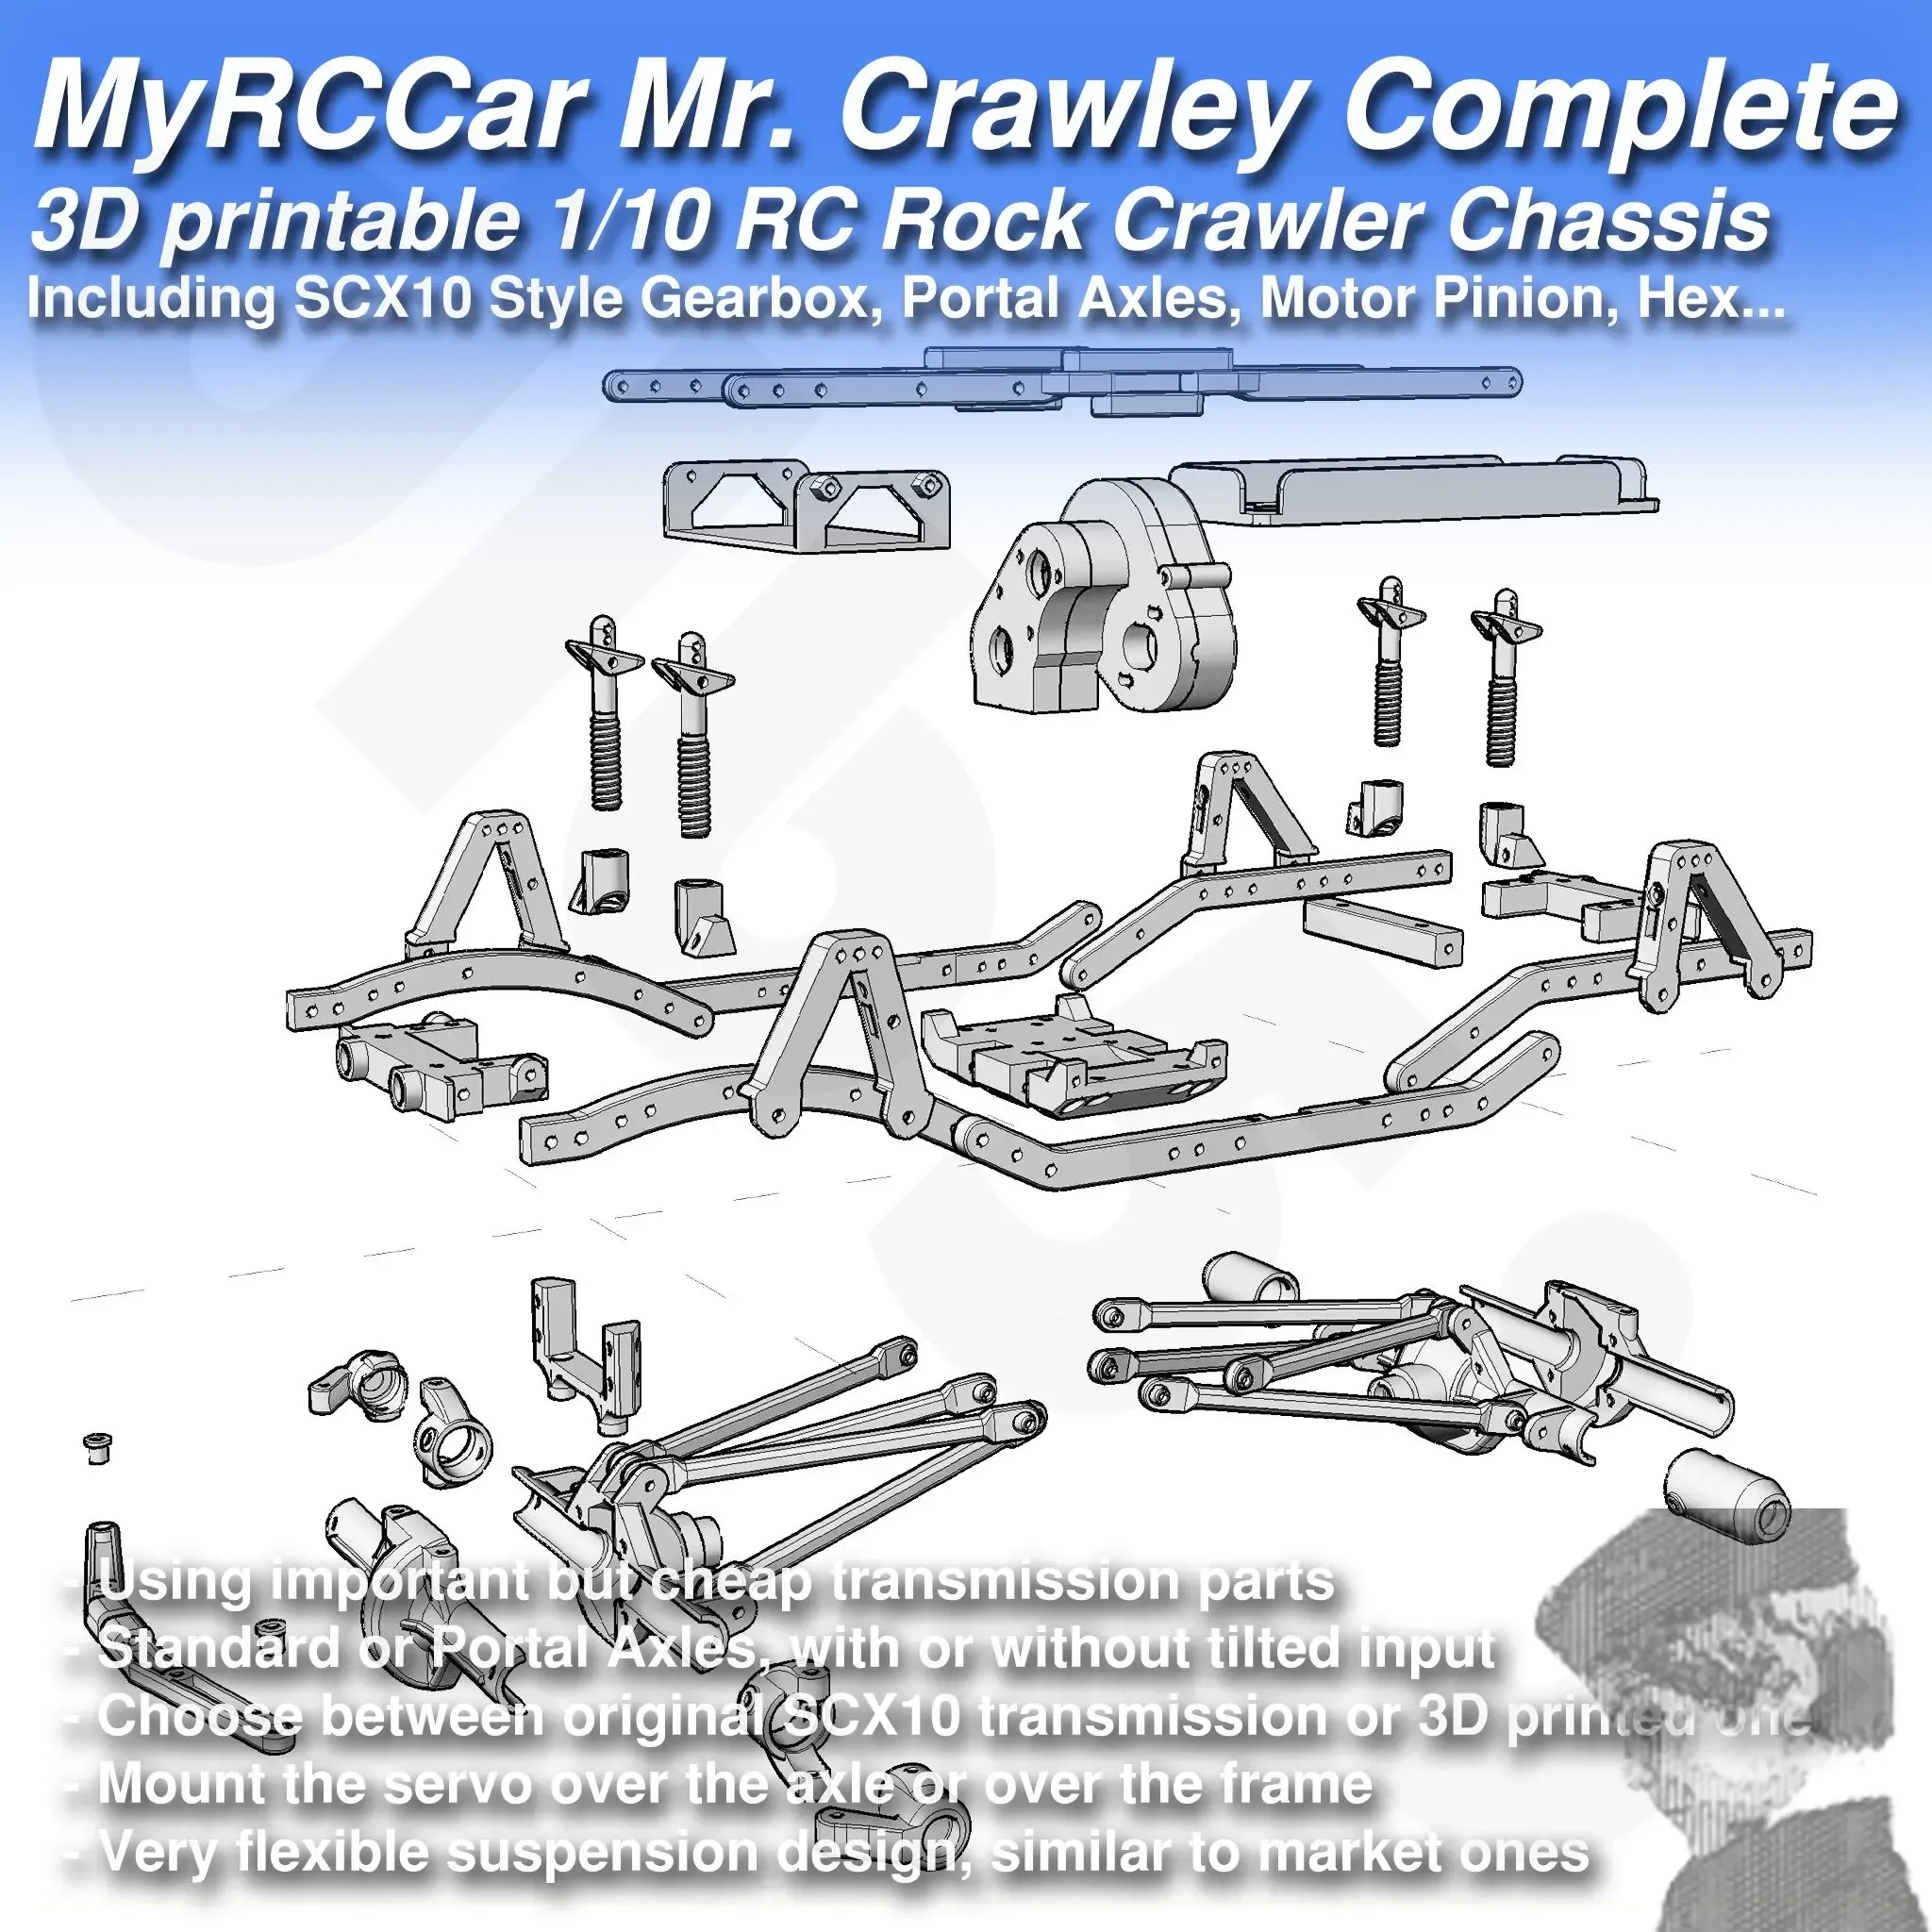 MyRCCar Mr. Crawley Complete. 1/10  RC Rock Crawler Chassis